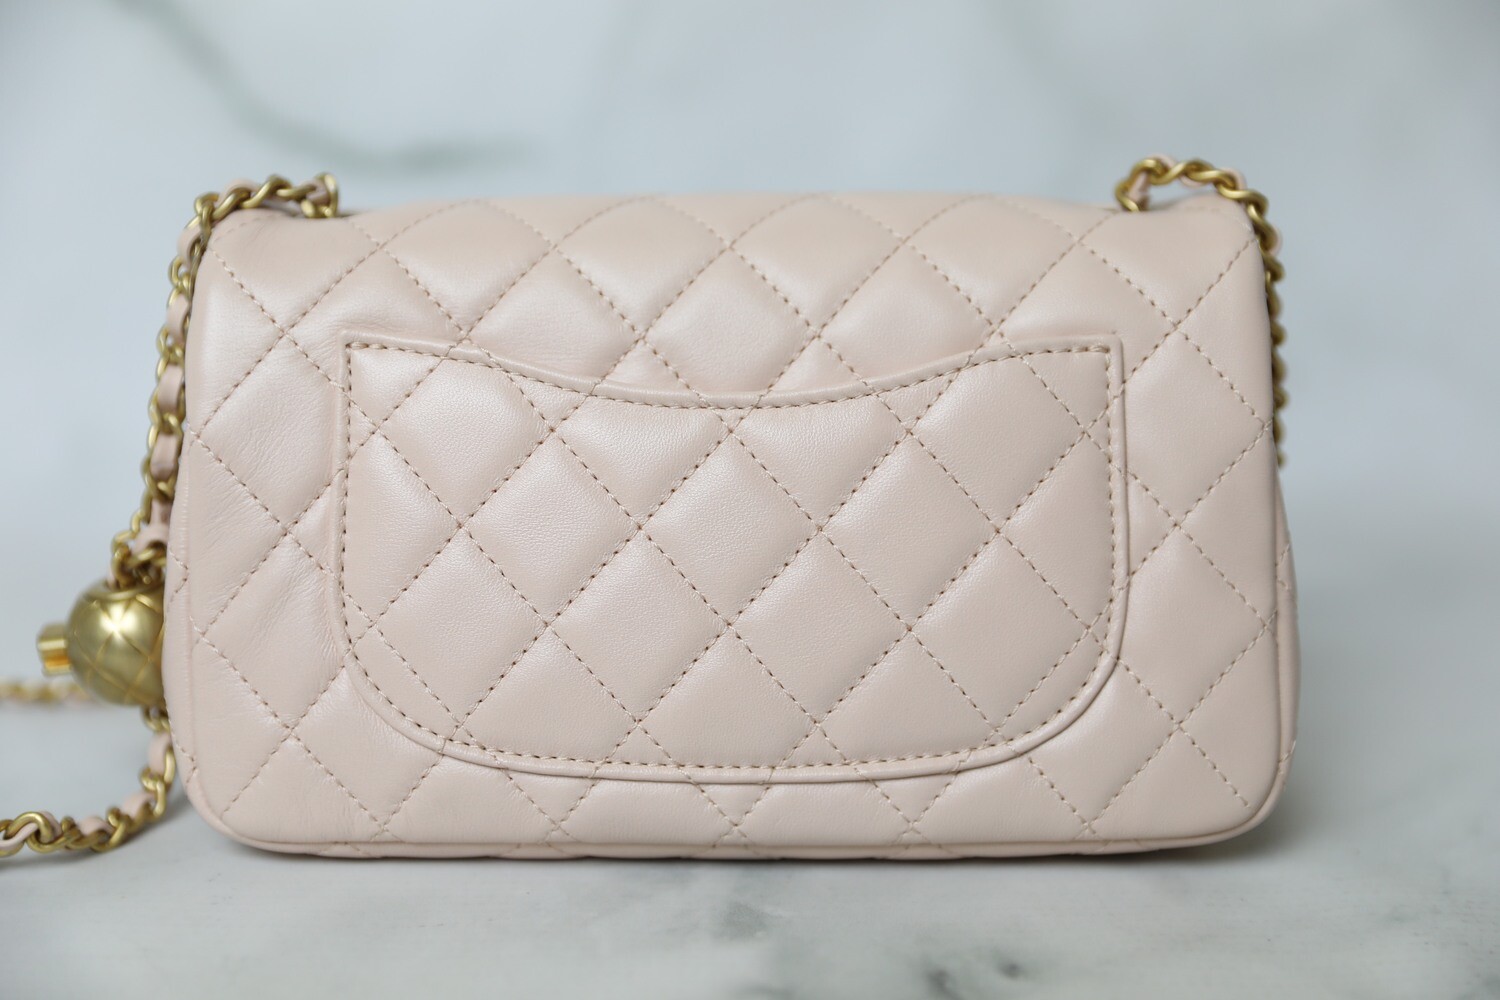 Chanel My Precious Pearl Mini Rectangular Bag Unboxing - Modernly